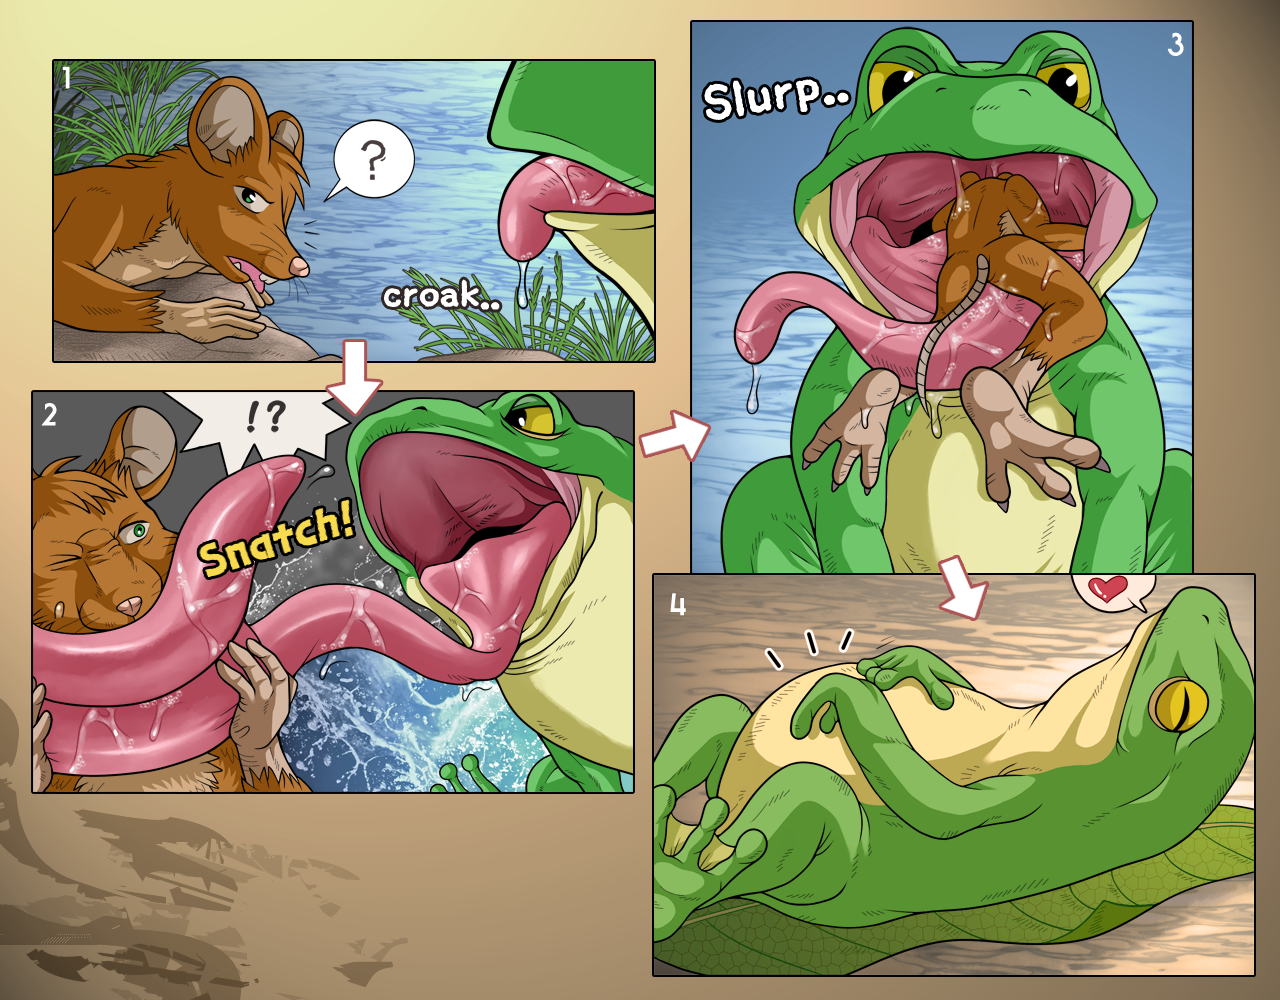 Frog vore: a crazy comic world full of sensual delights